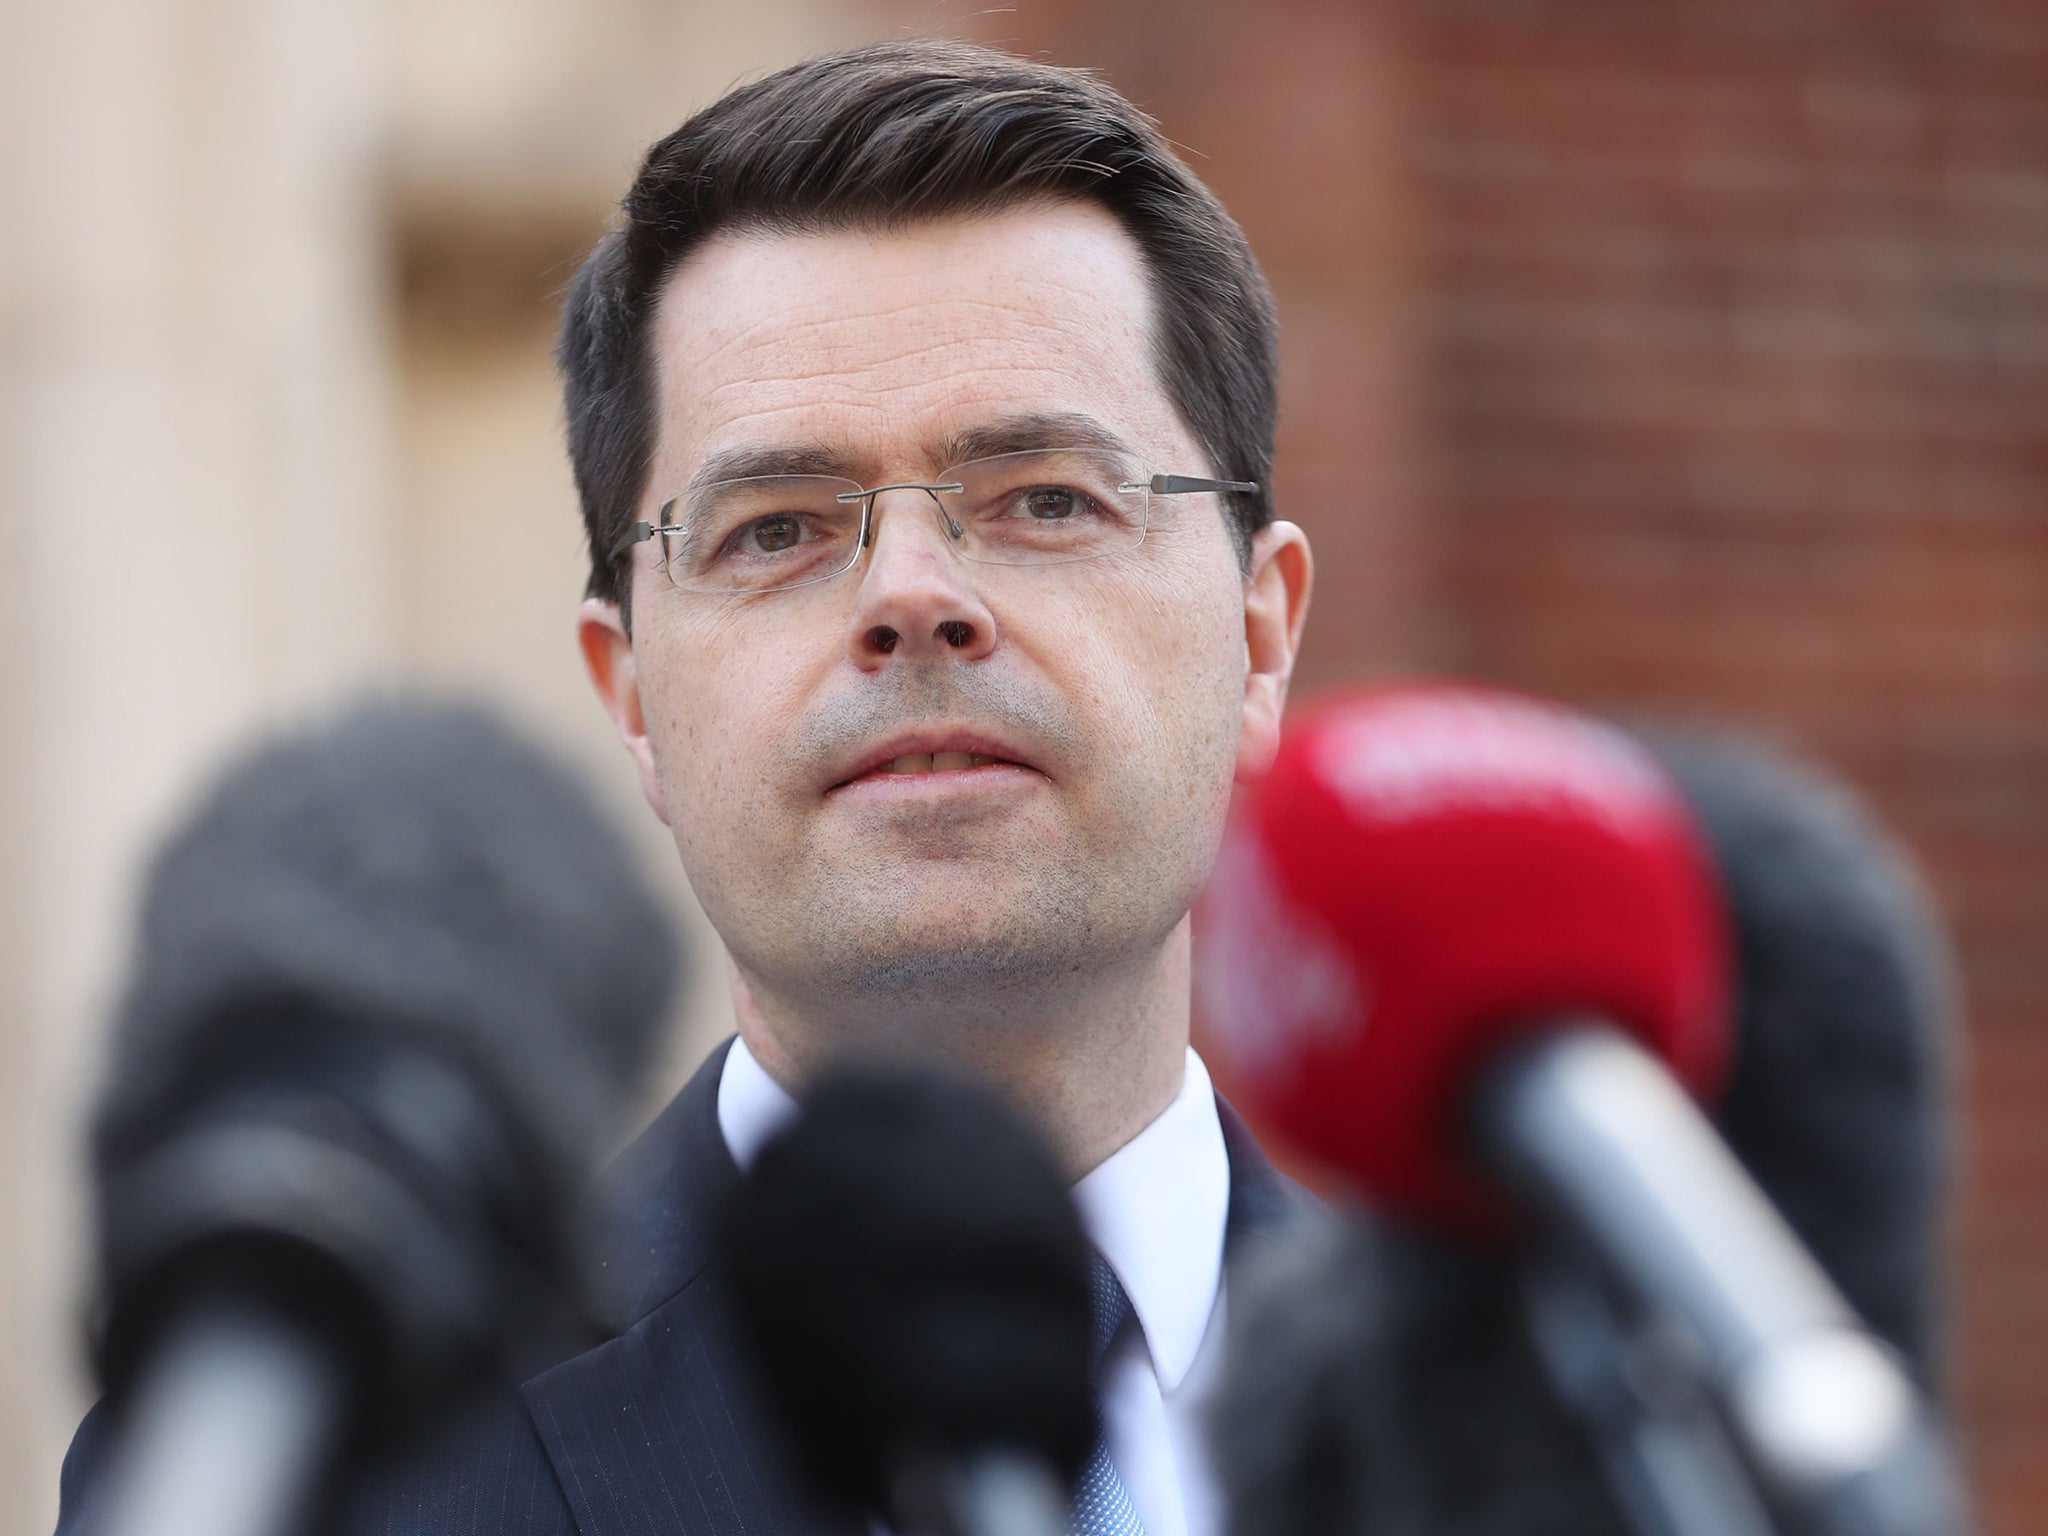 James Brokenshire making a statement outside Stormont House following the breakdown of talks between Sinn Fein and the DUP over forming a government